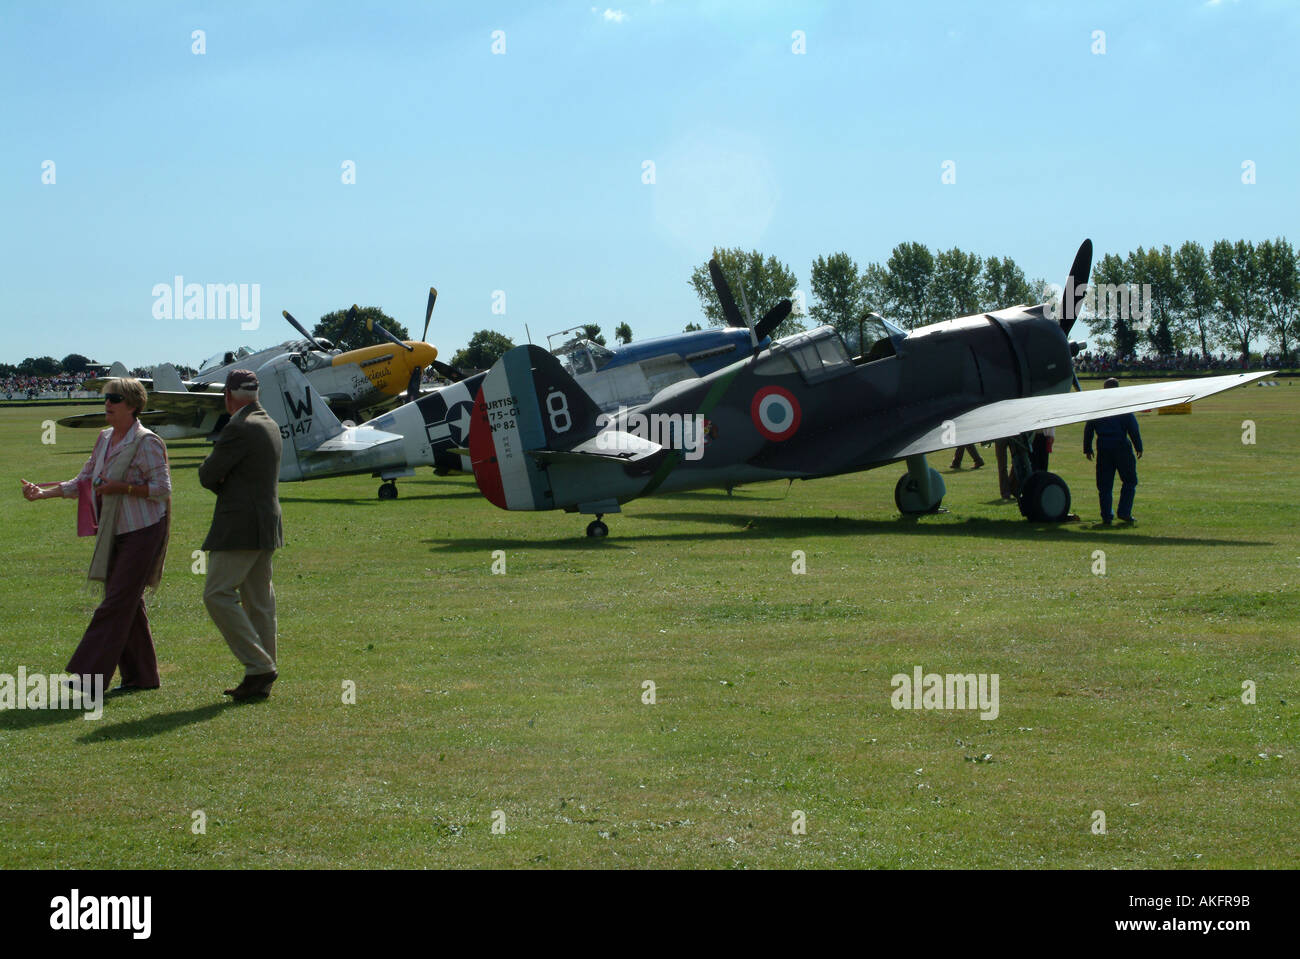 Curtiss 75A 1 Hawk Fighter Plane at Goodwood Revival Meeting 2005 Stock Photo